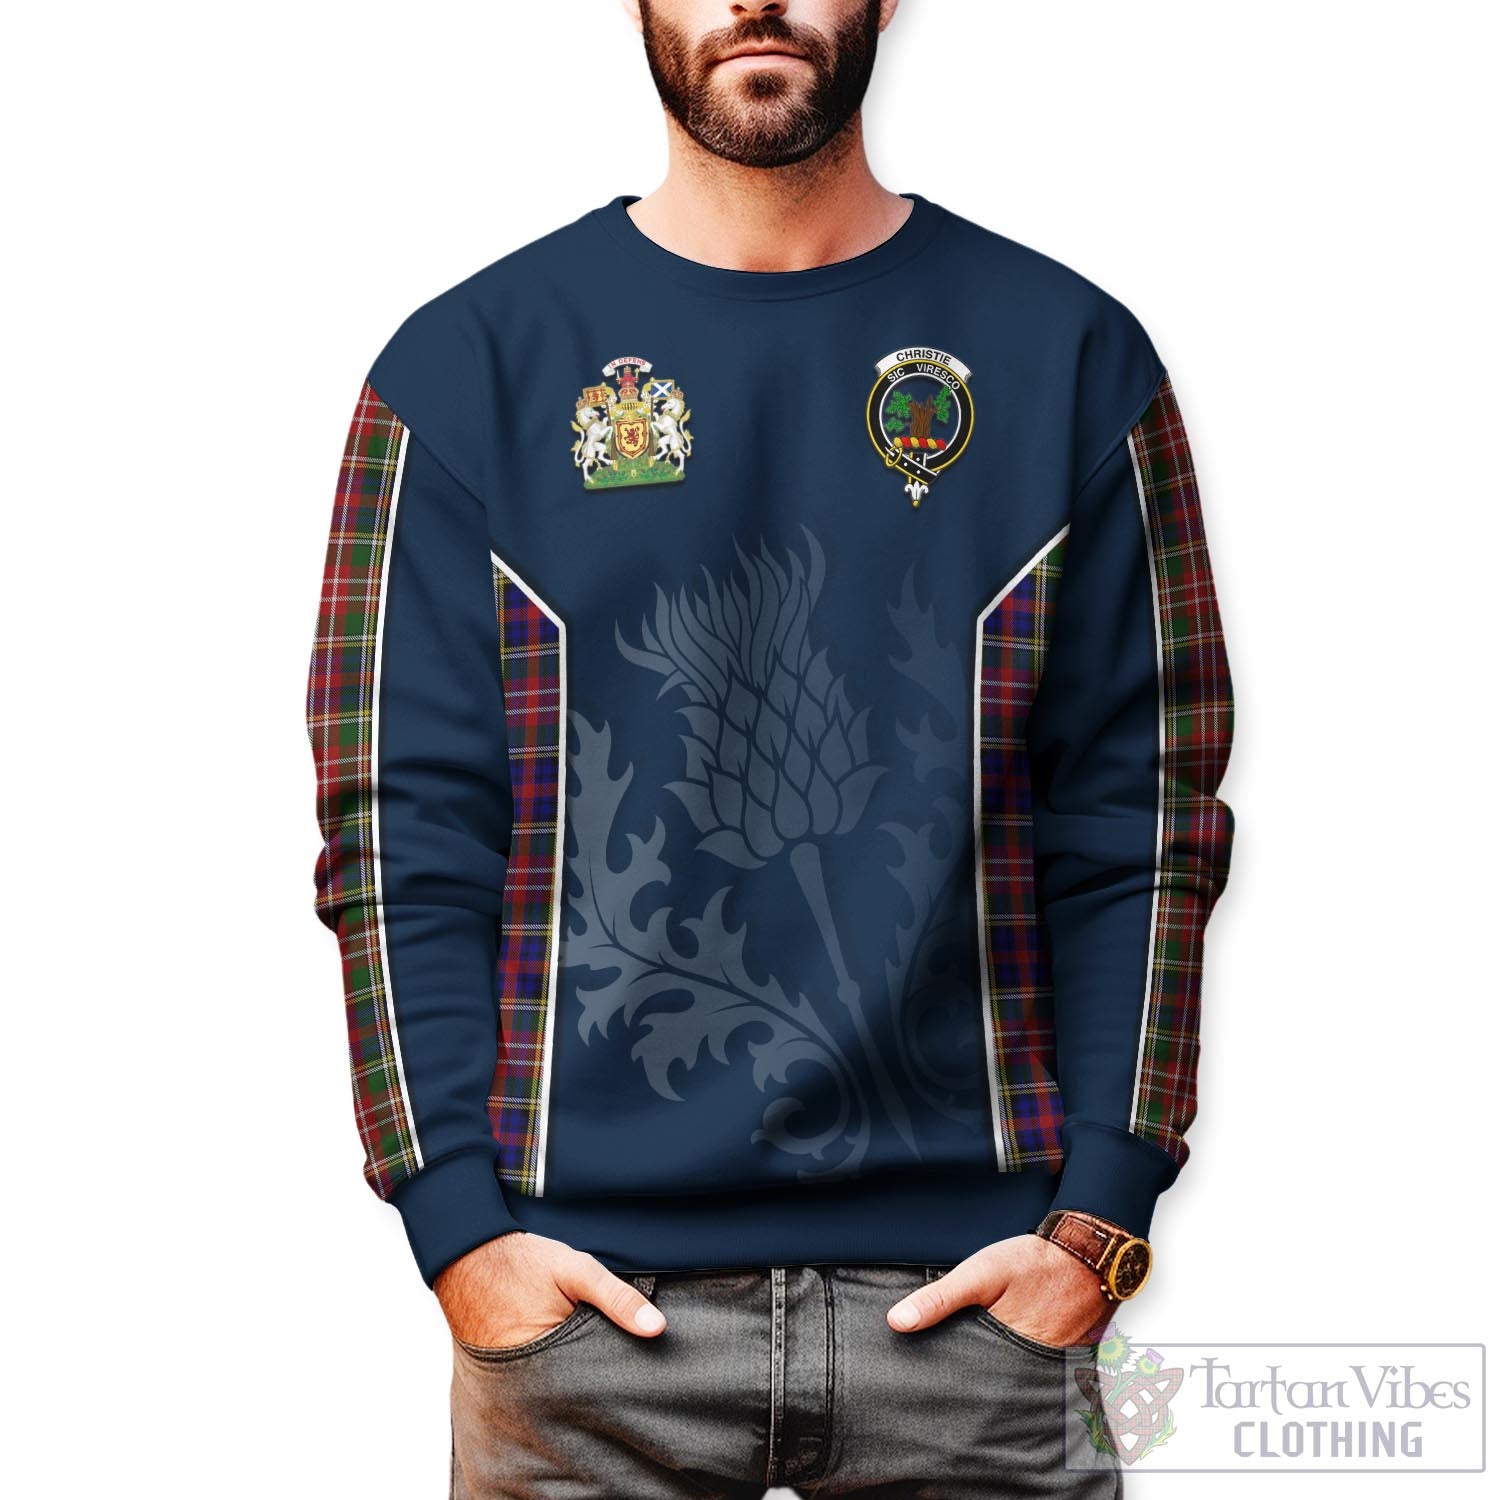 Tartan Vibes Clothing Christie Tartan Sweatshirt with Family Crest and Scottish Thistle Vibes Sport Style